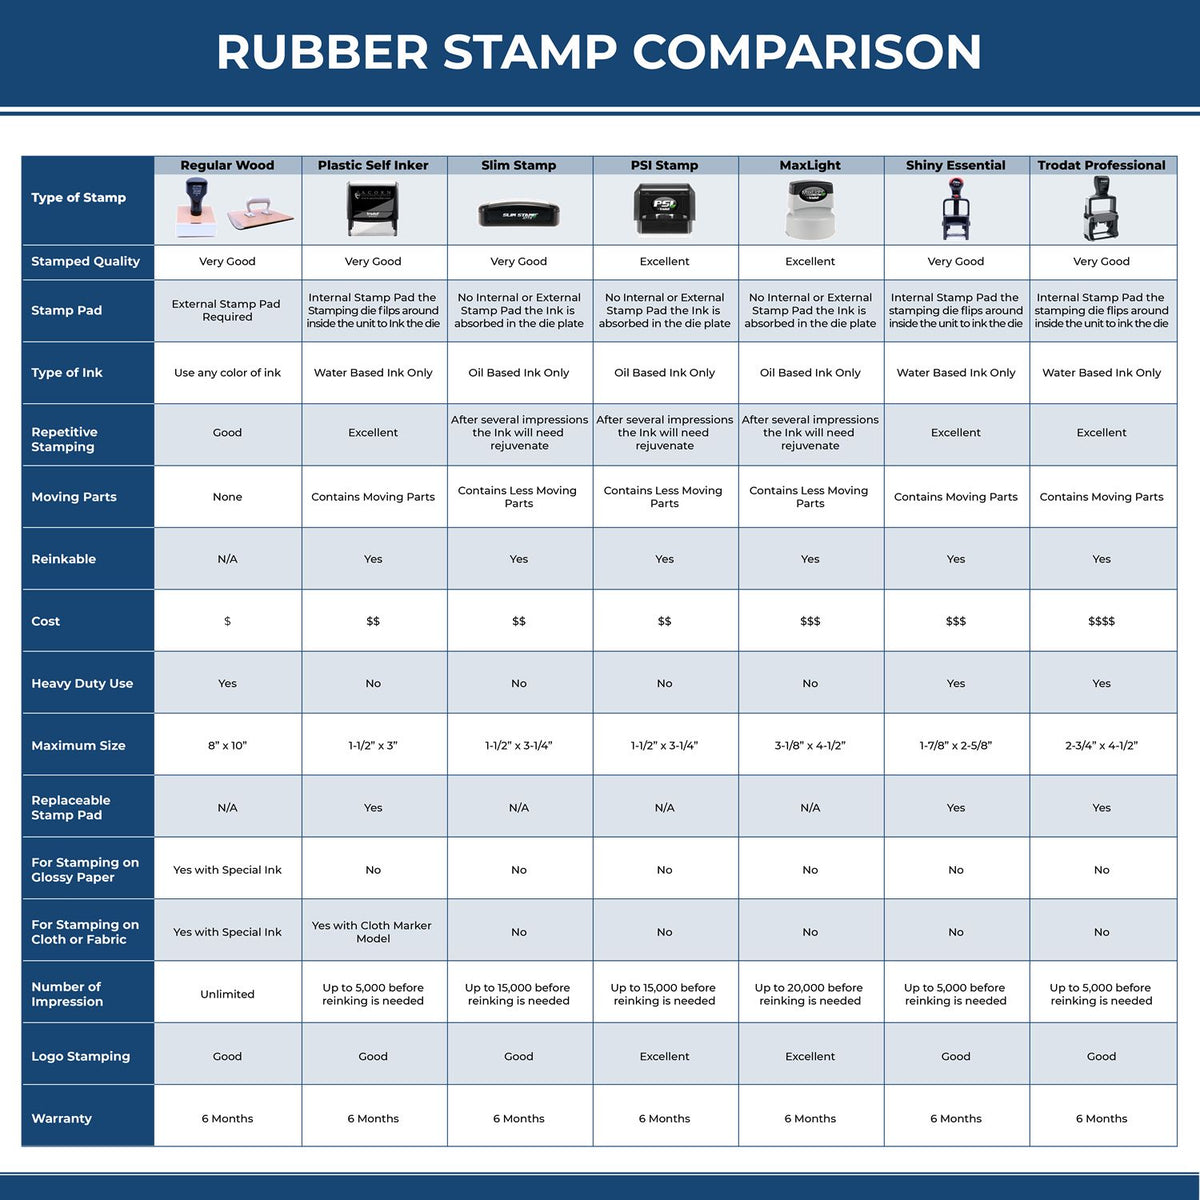 Large Self-Inking Narrow Posted Stamp 4957S Rubber Stamp Comparison